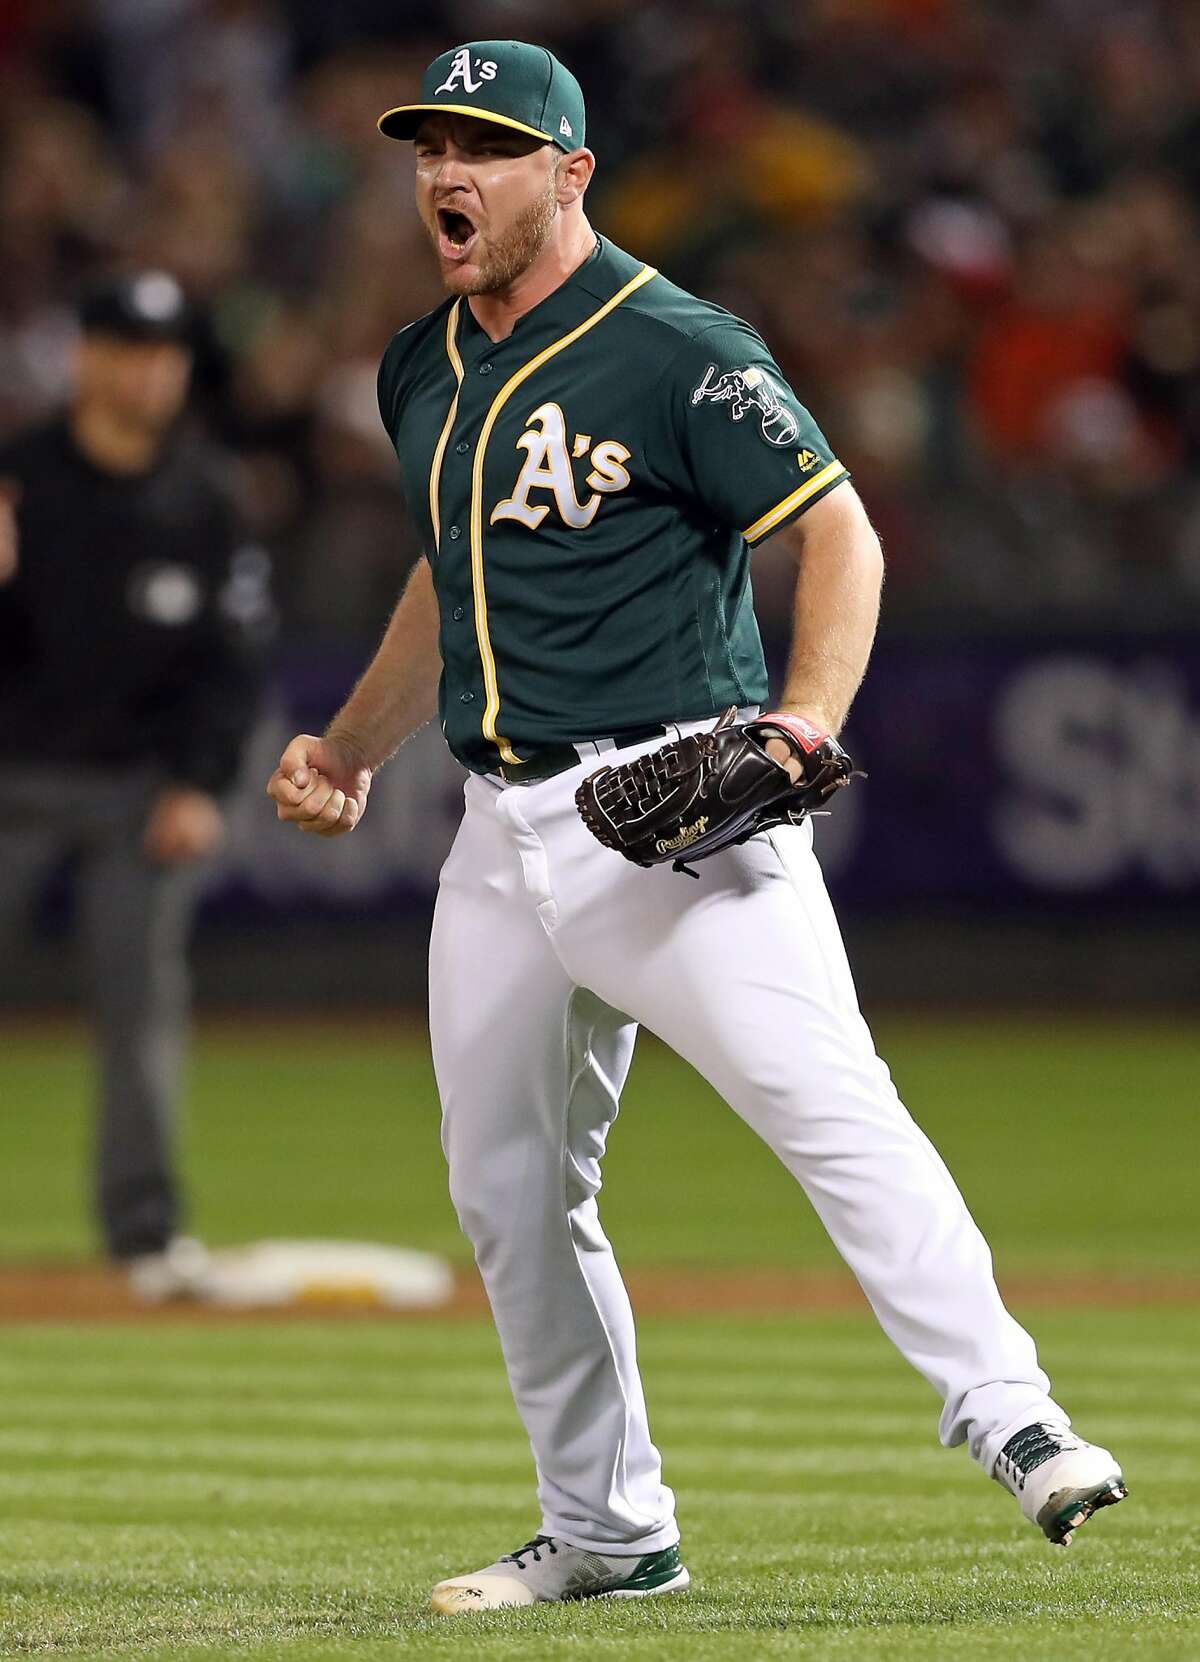 Oakland Athletics' Liam Hendriks reacts to striking out San Francisco Giants' Buster Posey with the tying run on 3rd base to end top of 7th inning during MLB game at Oakland Coliseum in Oakland, Calif. on Monday, July 31, 2017.